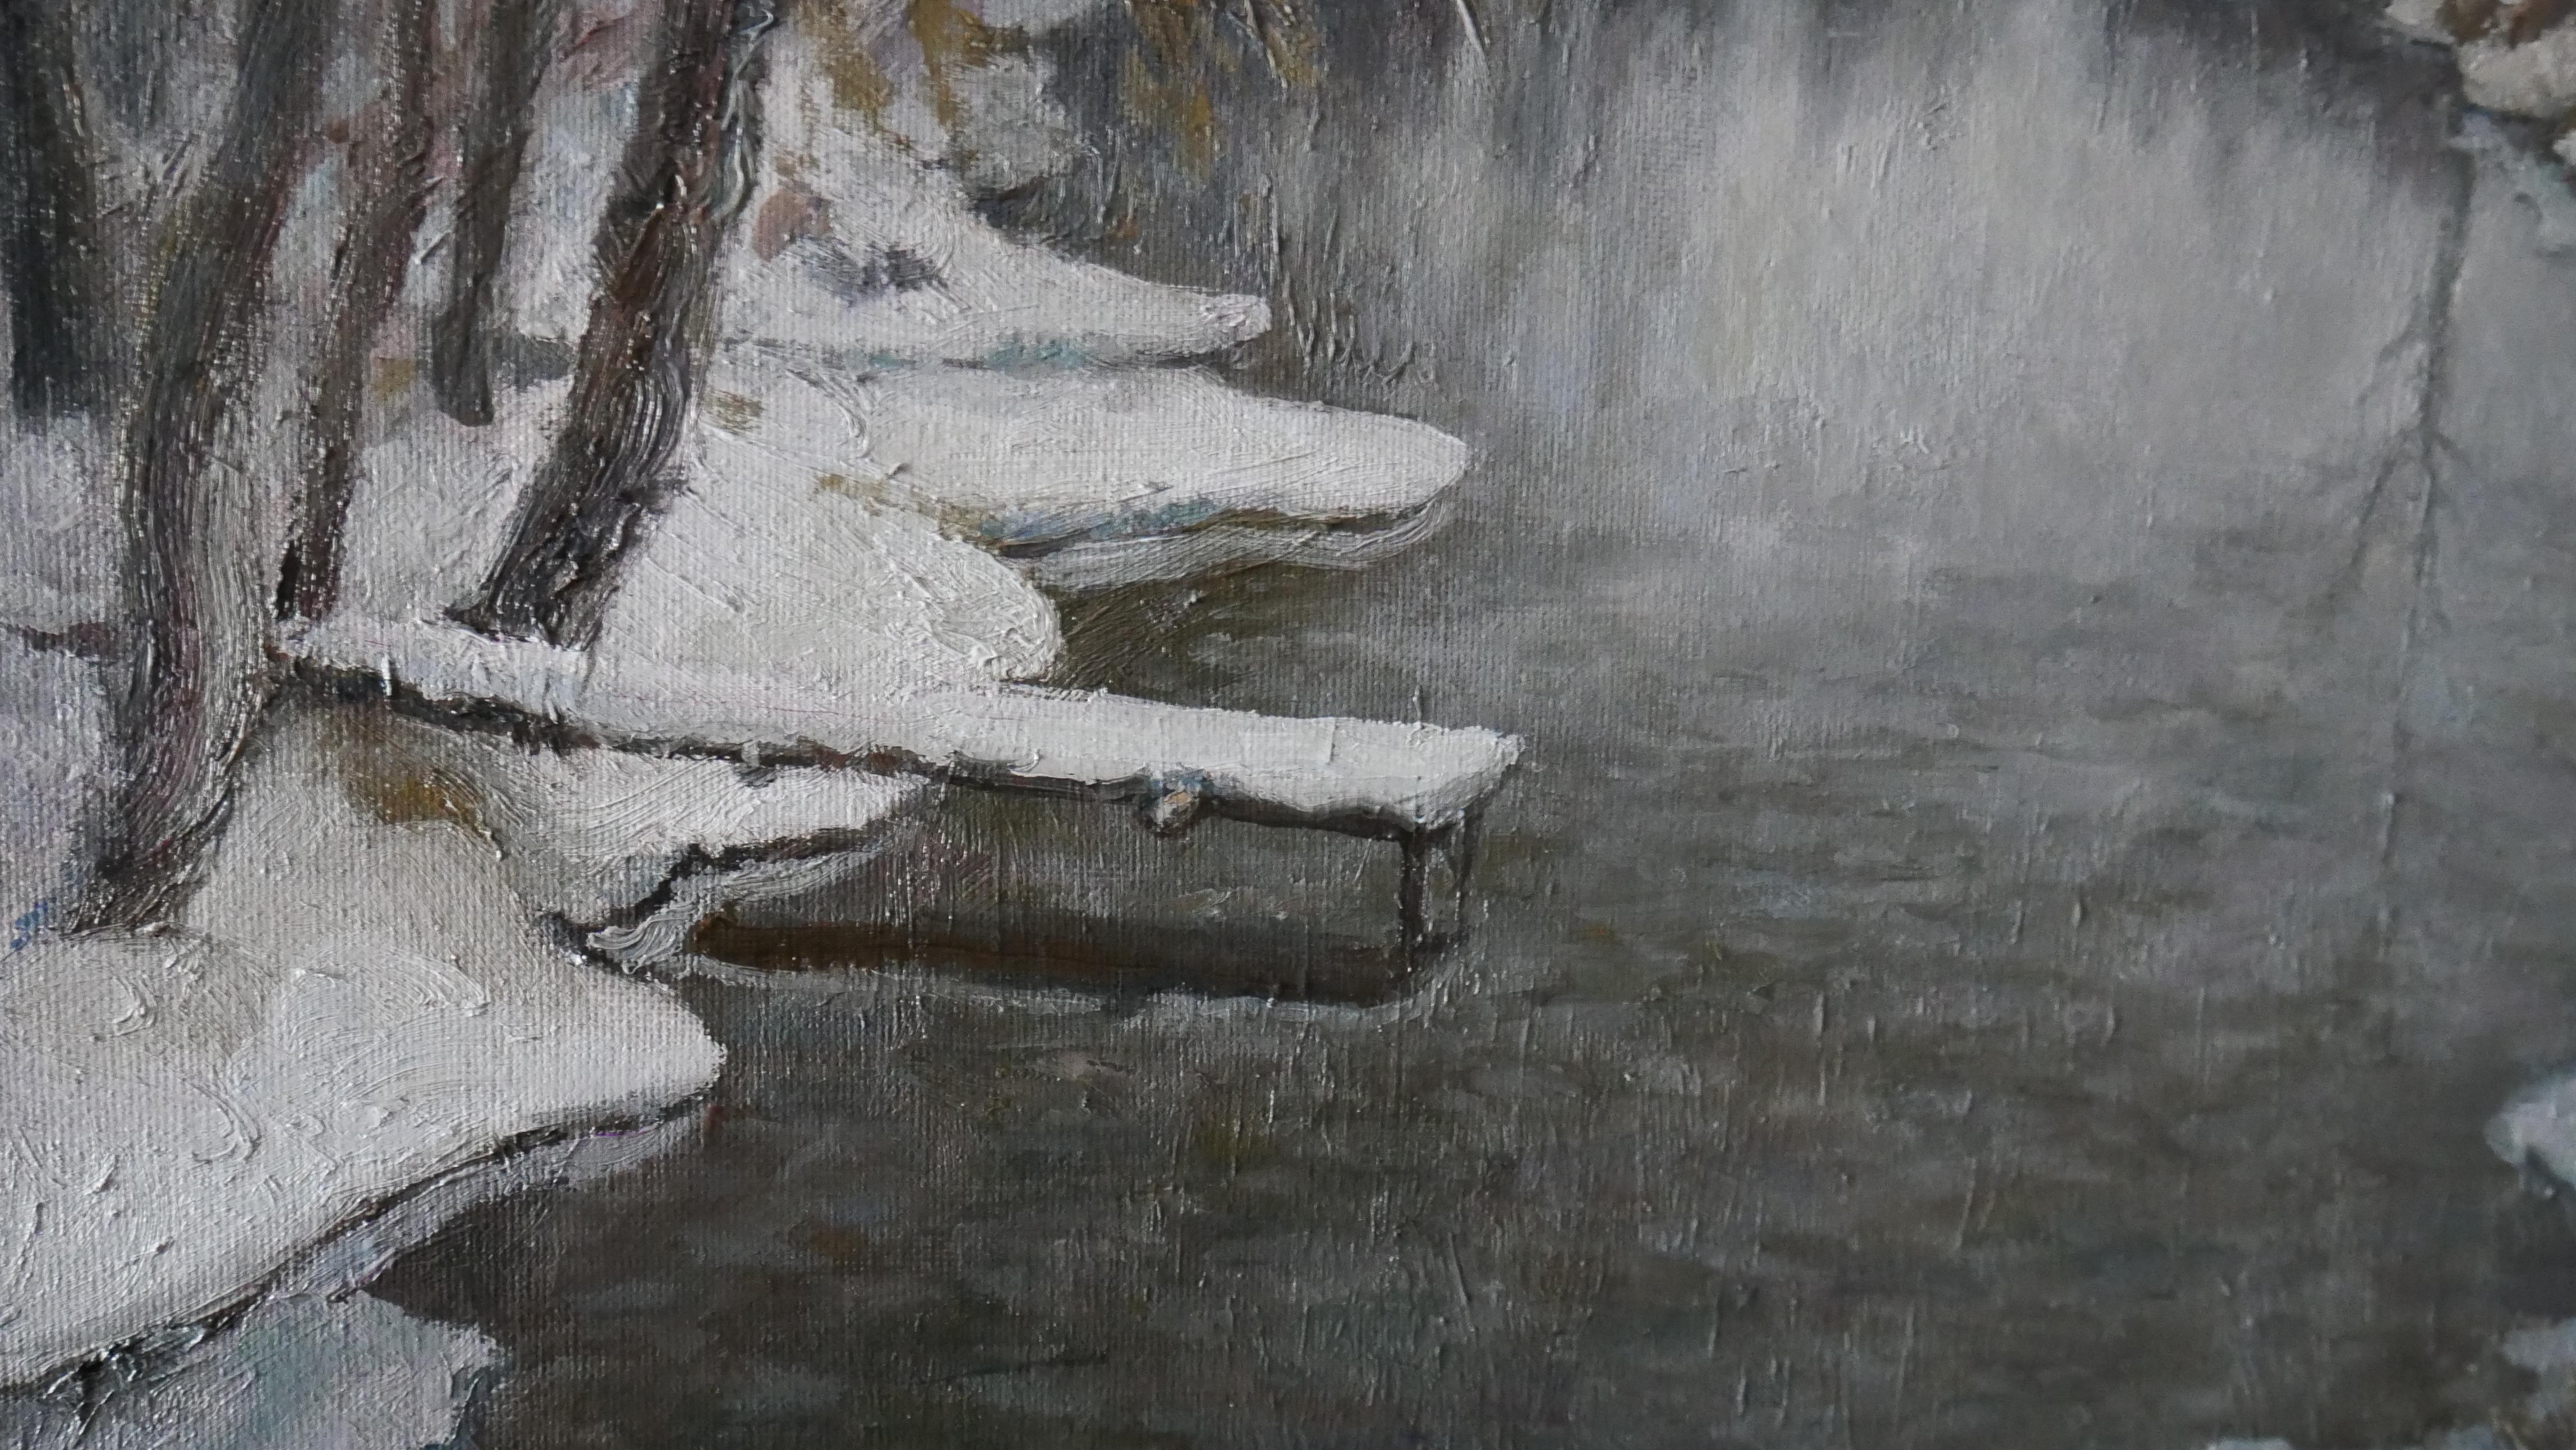 The Cold Winter River - winter landscape painting For Sale 1